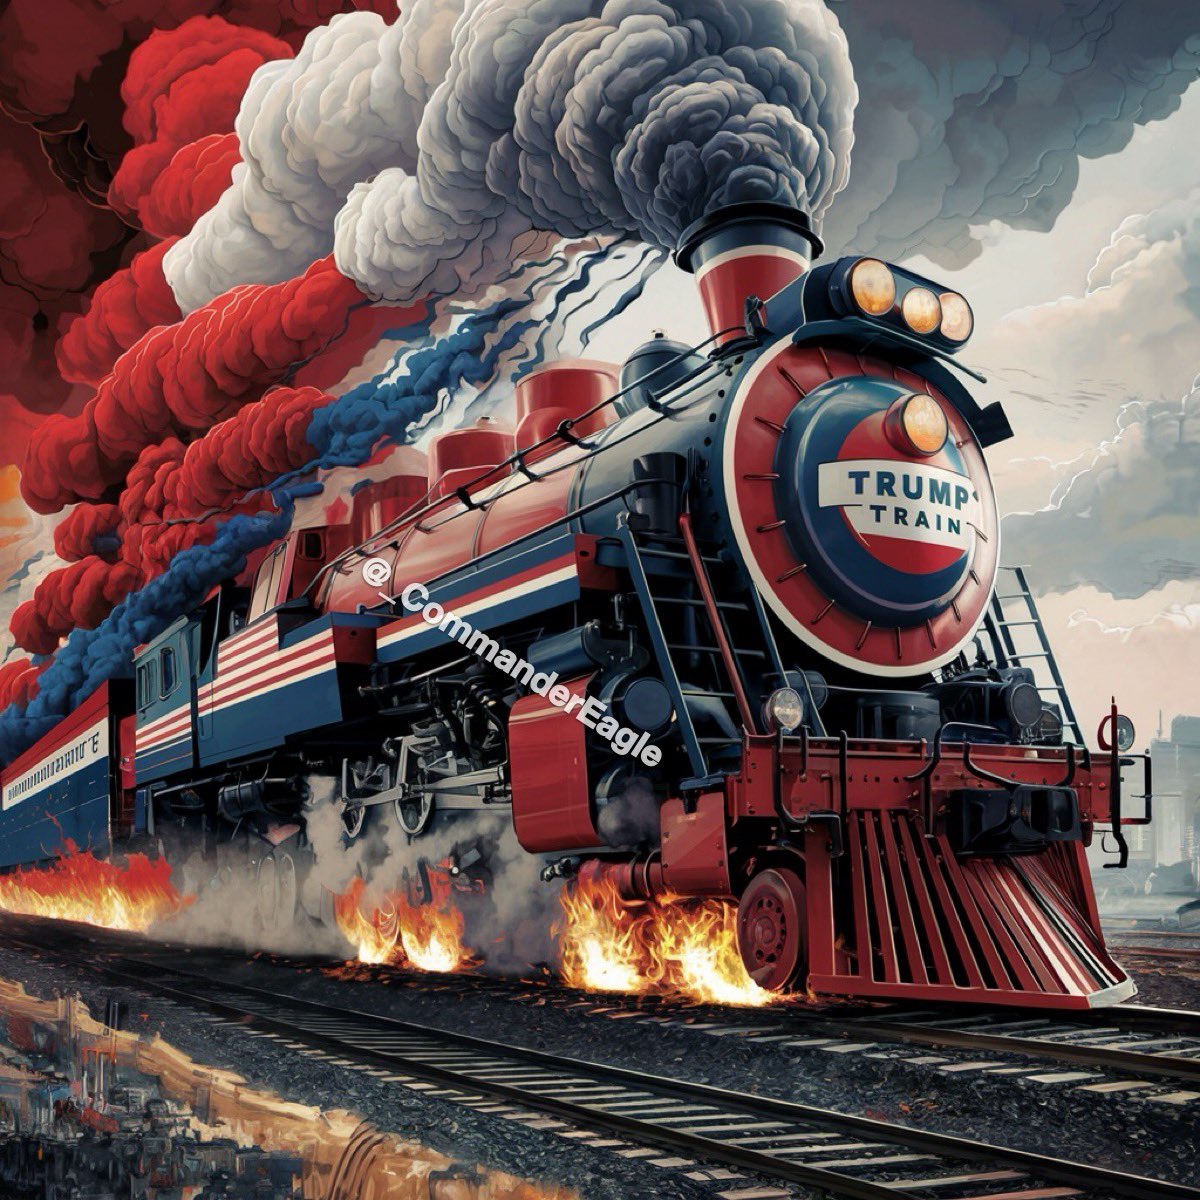 FRIDAY EVENING TRAIN!!! 🚂 🚂 🚂 PATRIOTS YOU KNOW WHAT TO DO! FOLLOW BACK ALL TRUE PATRIOTS! GOD BLESS AMERICA 🇺🇸🇺🇸🇺🇸🇺🇸 LET’S GO!!! 🔥🔥🔥🔥🔥🔥🔥🔥